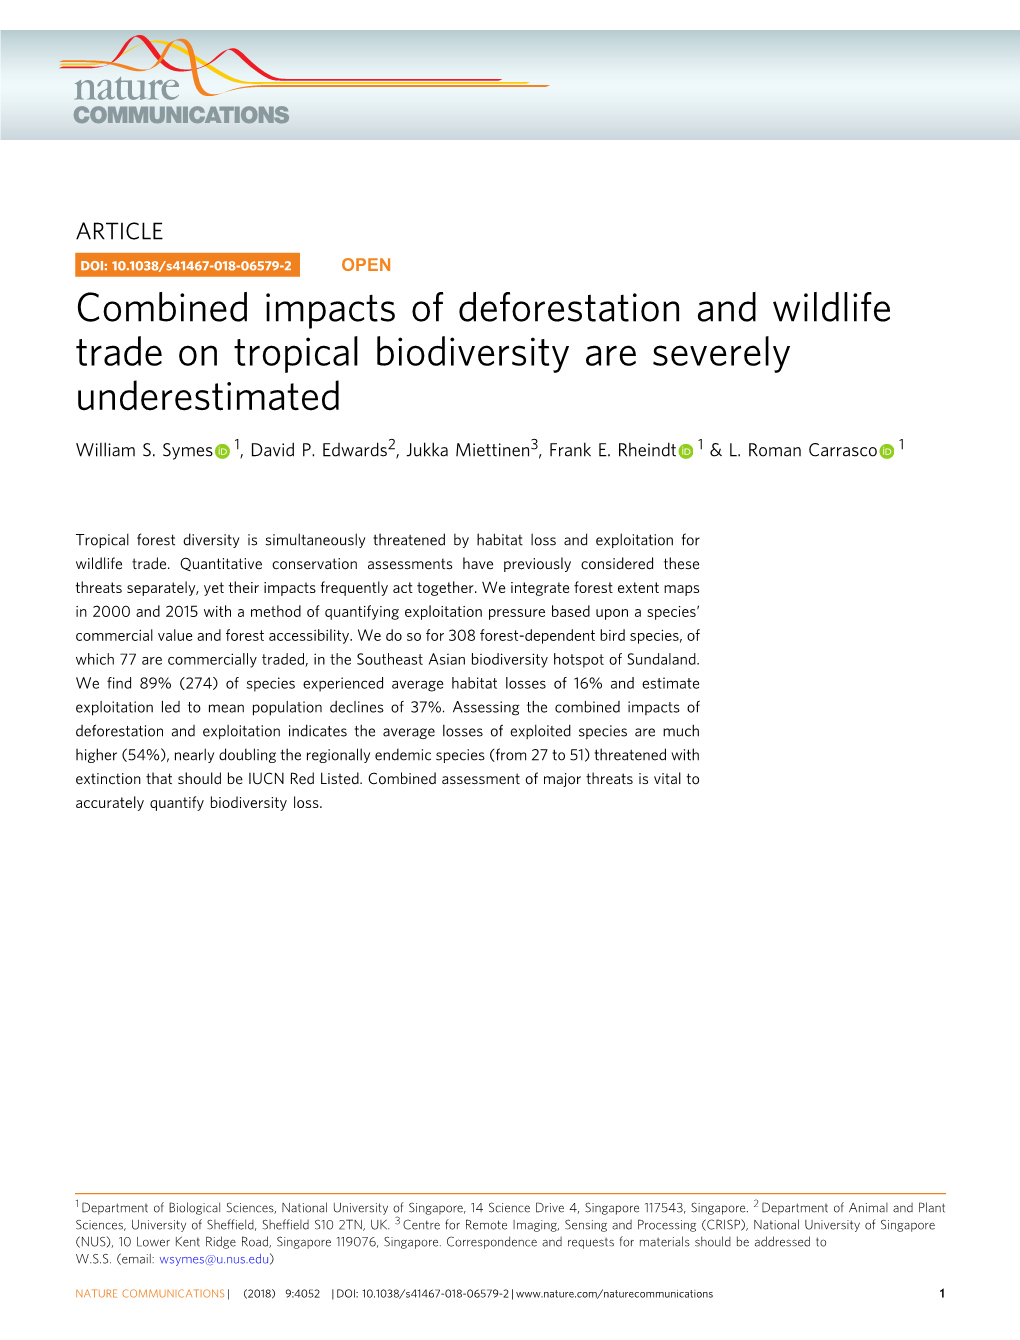 Combined Impacts of Deforestation and Wildlife Trade on Tropical Biodiversity Are Severely Underestimated